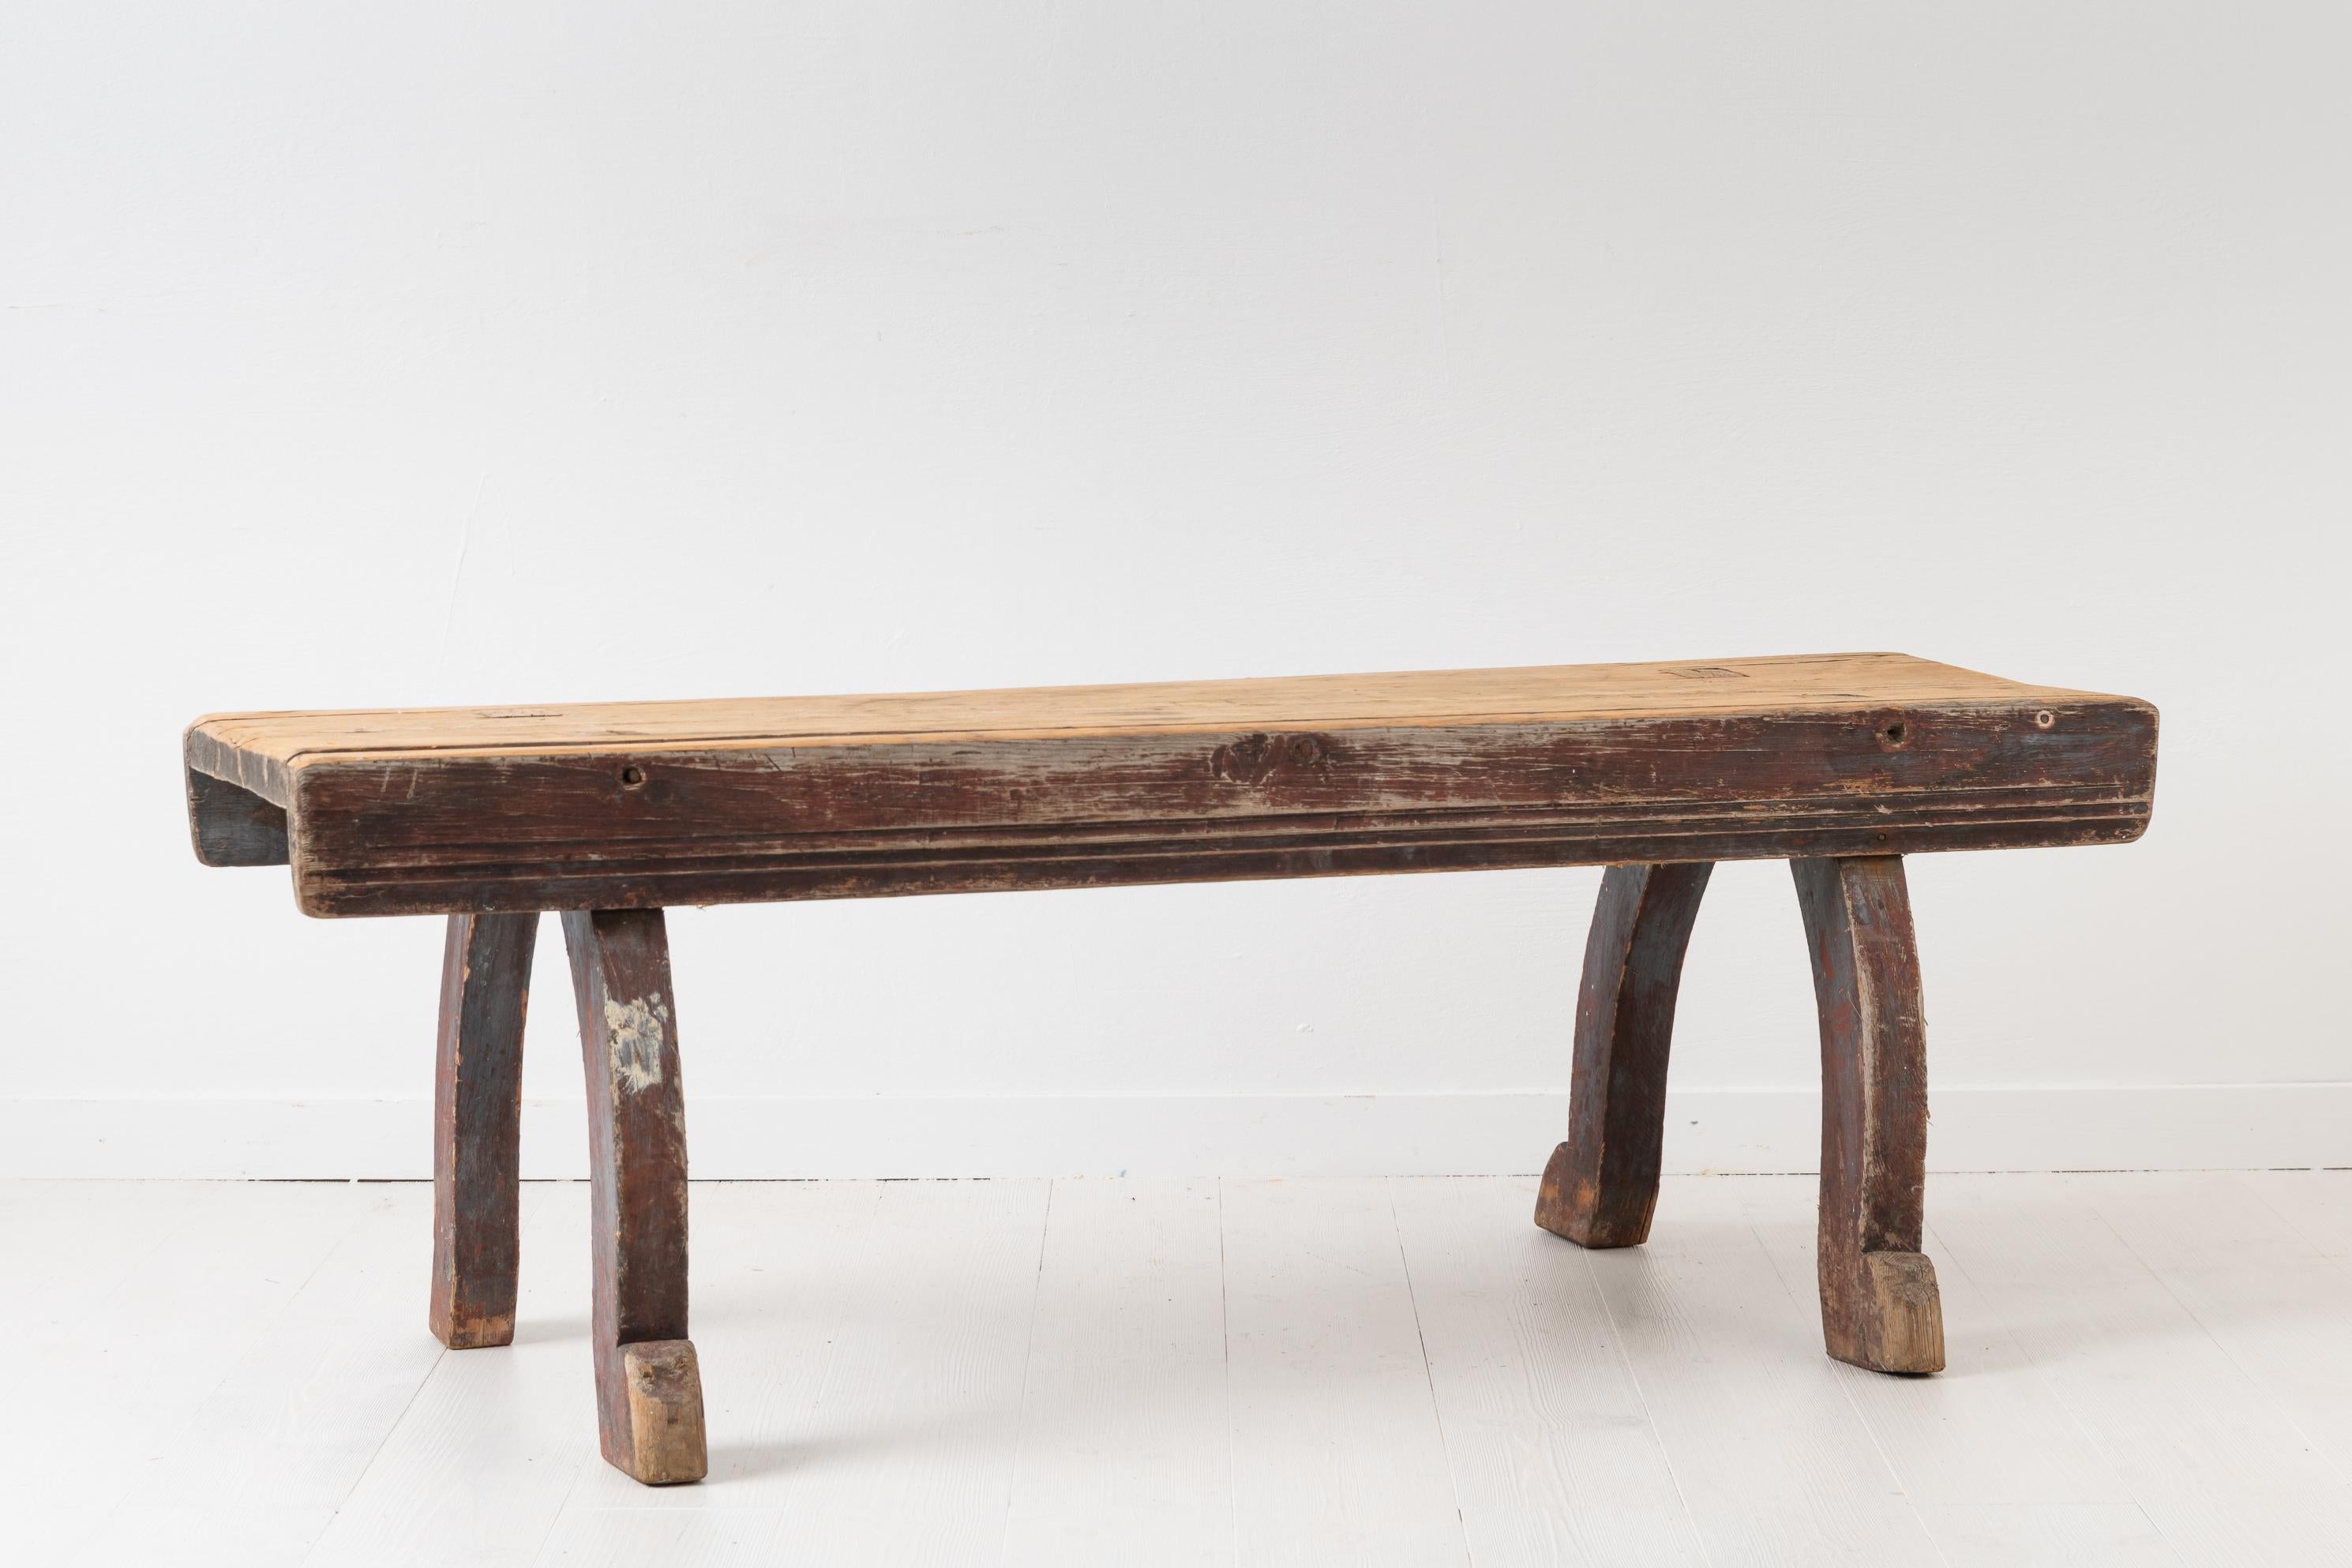 Hand-Crafted 18th Century Swedish Rustic Folk Art Bench For Sale